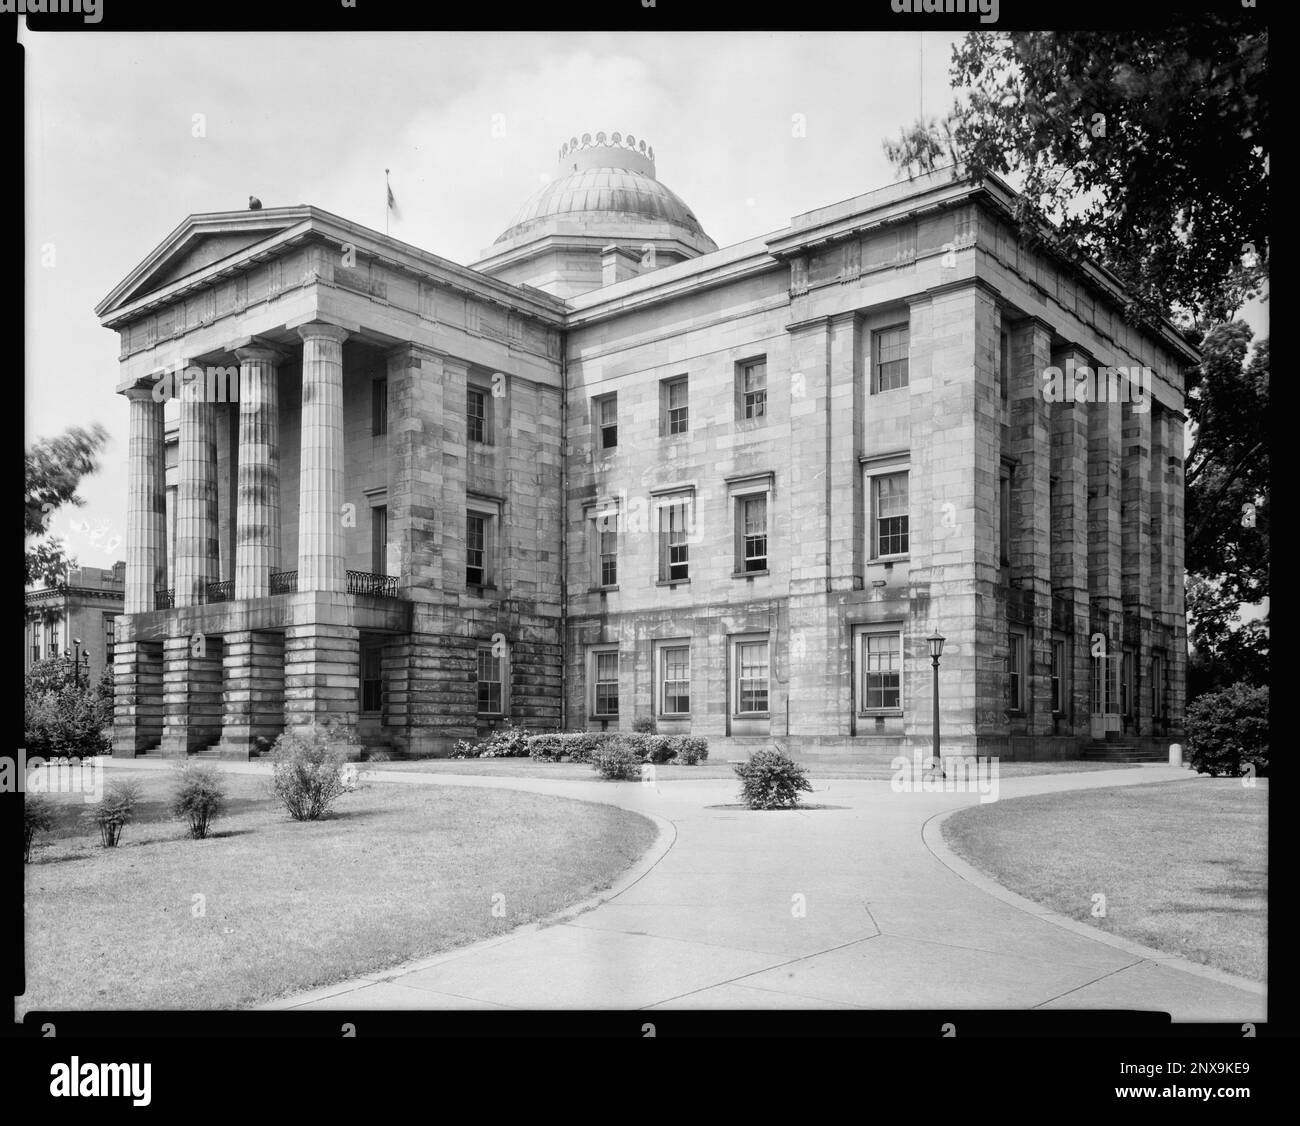 State Capitol, Raleigh, Wake County, North Carolina. Carnegie Survey of the Architecture of the South (Carnegie-Umfrage zur Architektur des Südens). United States North Carolina Wake County Raleigh, Capitols, Columns, Domes, Porticoes, Veranden. Stockfoto